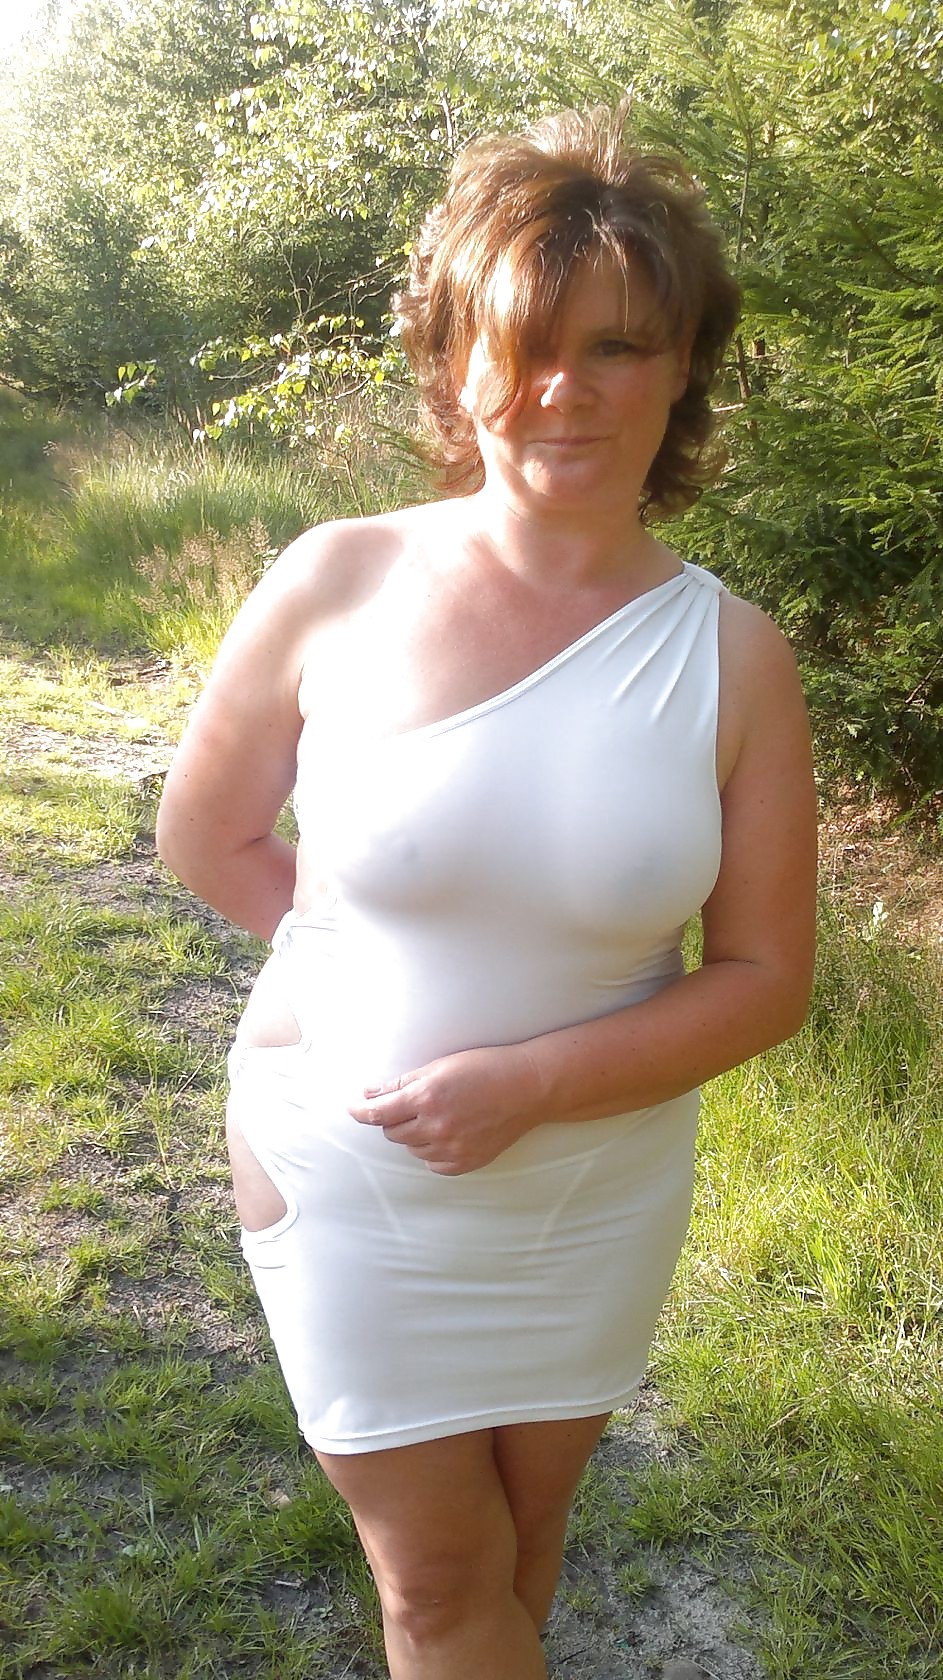 Mature Wife Sexy Dress - Milfs - Dressed And Sexy 4 - 48 Pics - xHamster.com